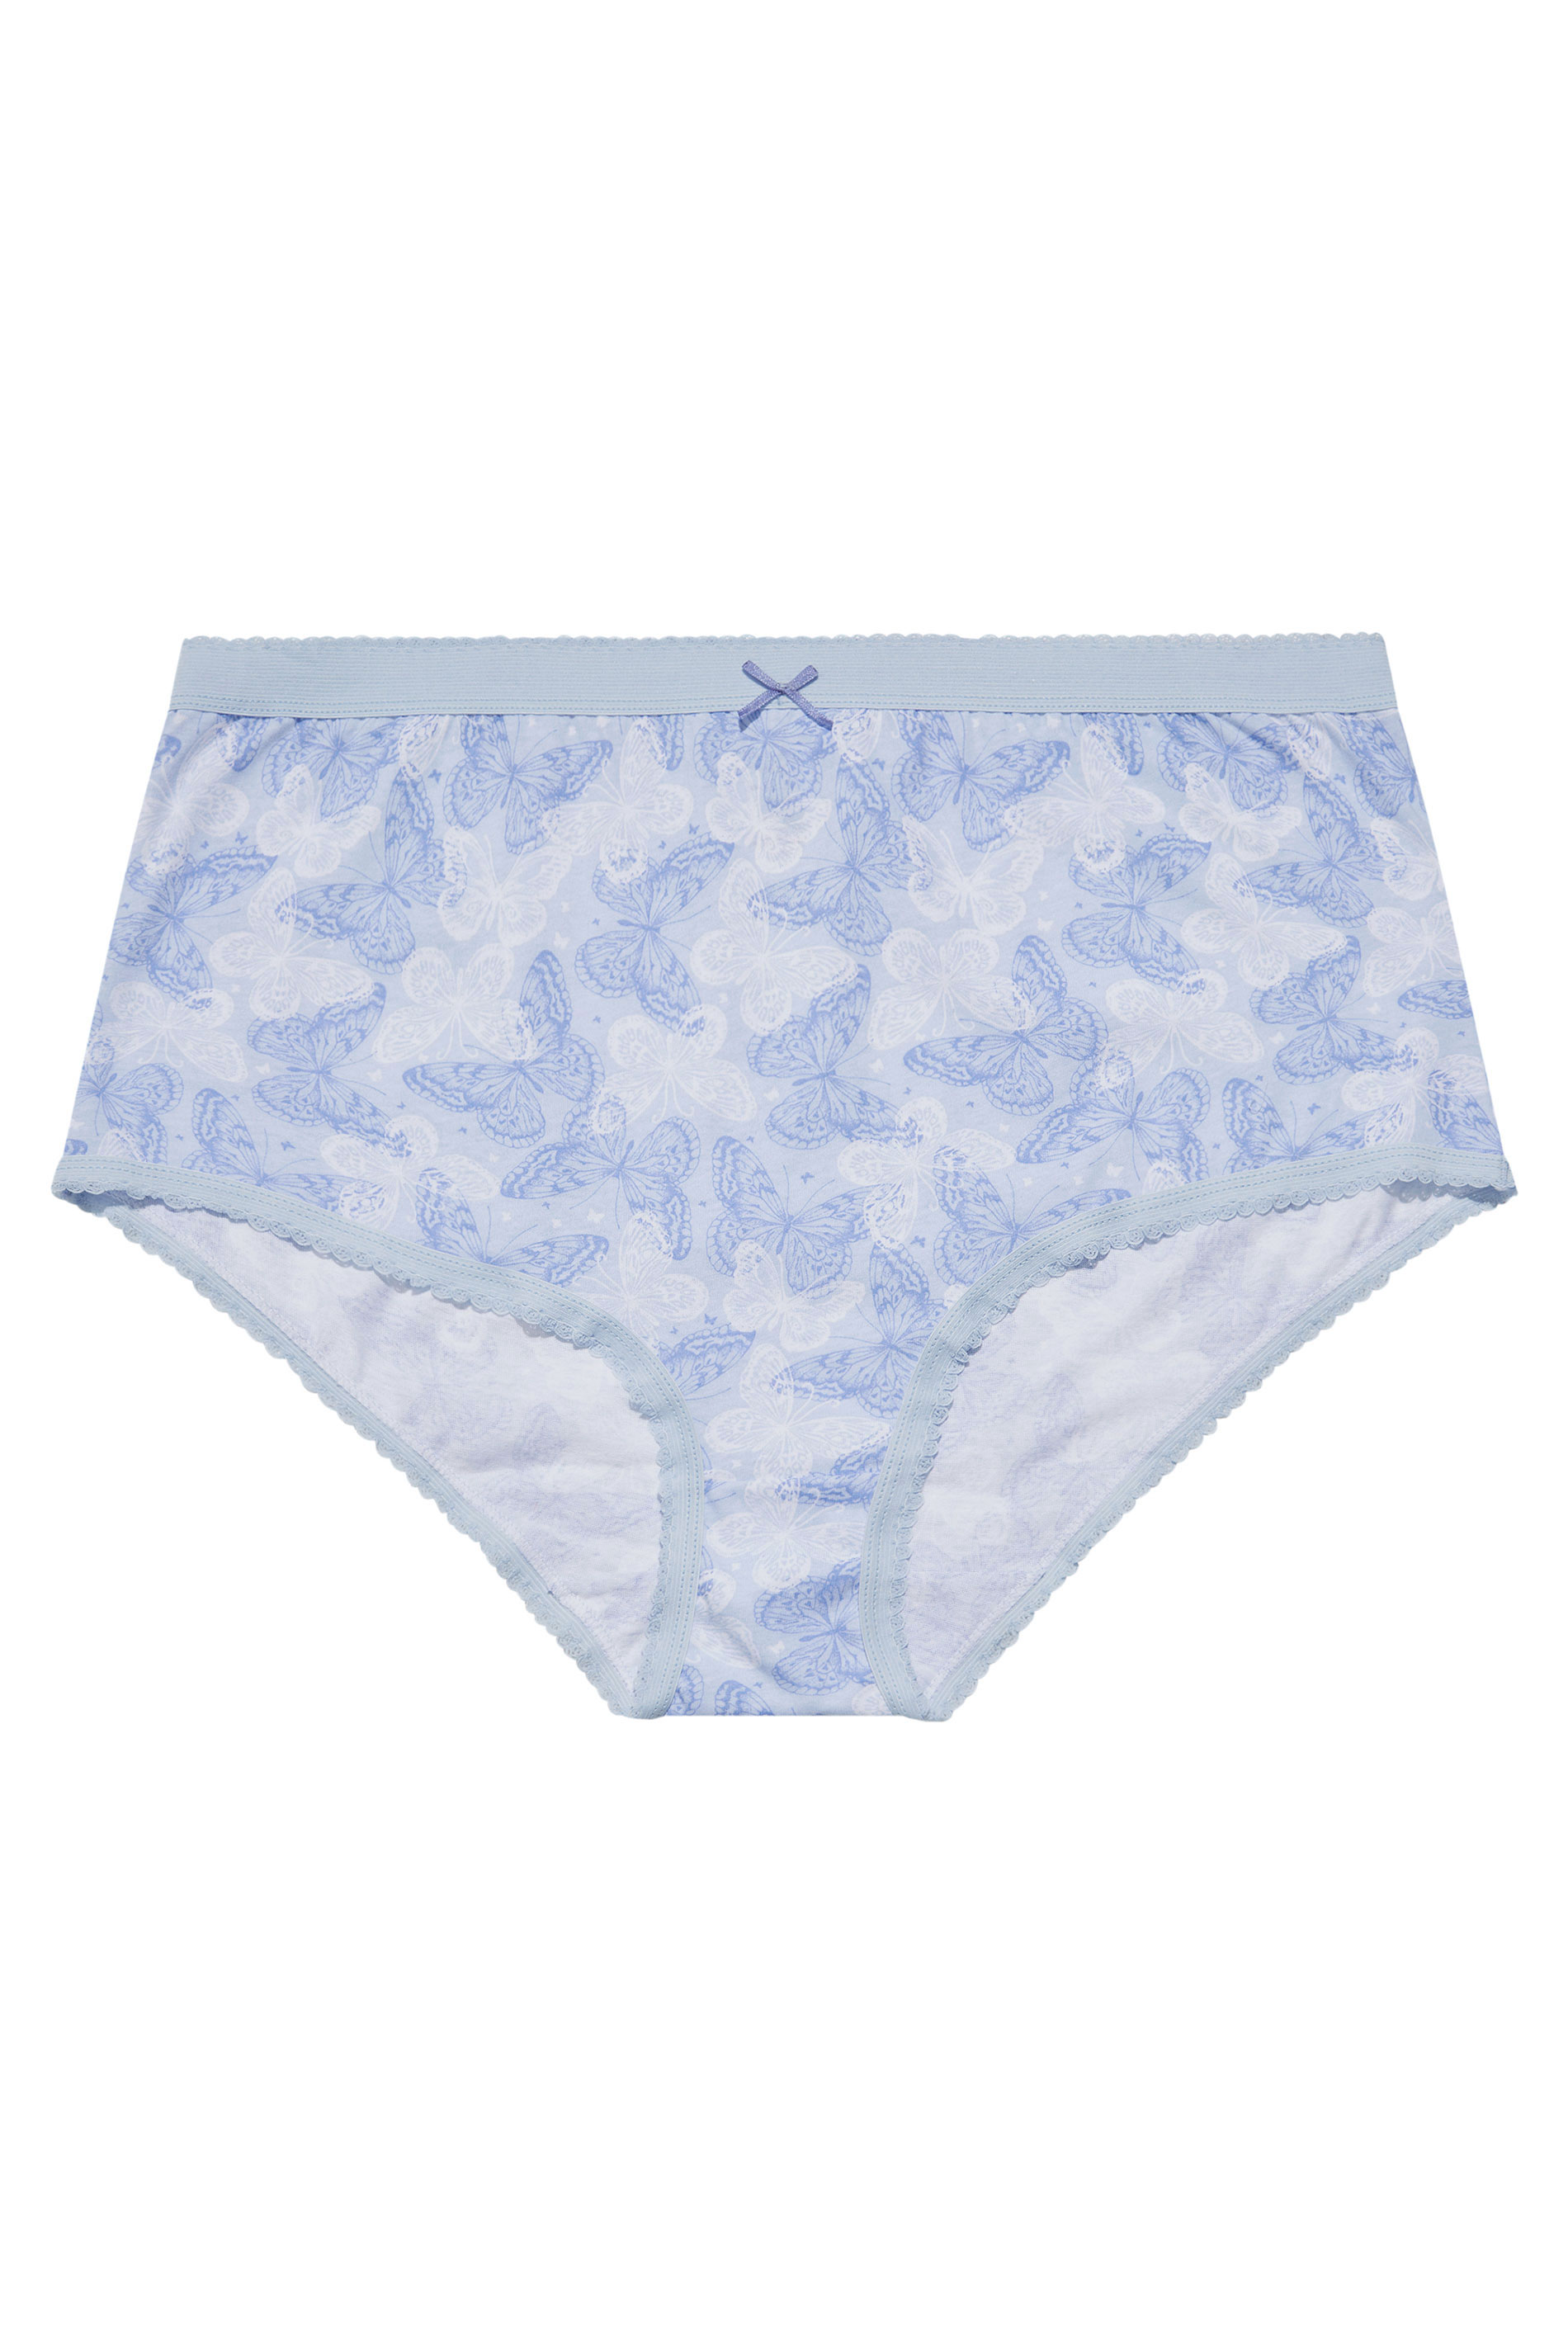 Plus Size 5 PACK Blue Butterfly Print Full Briefs | Yours Clothing  3